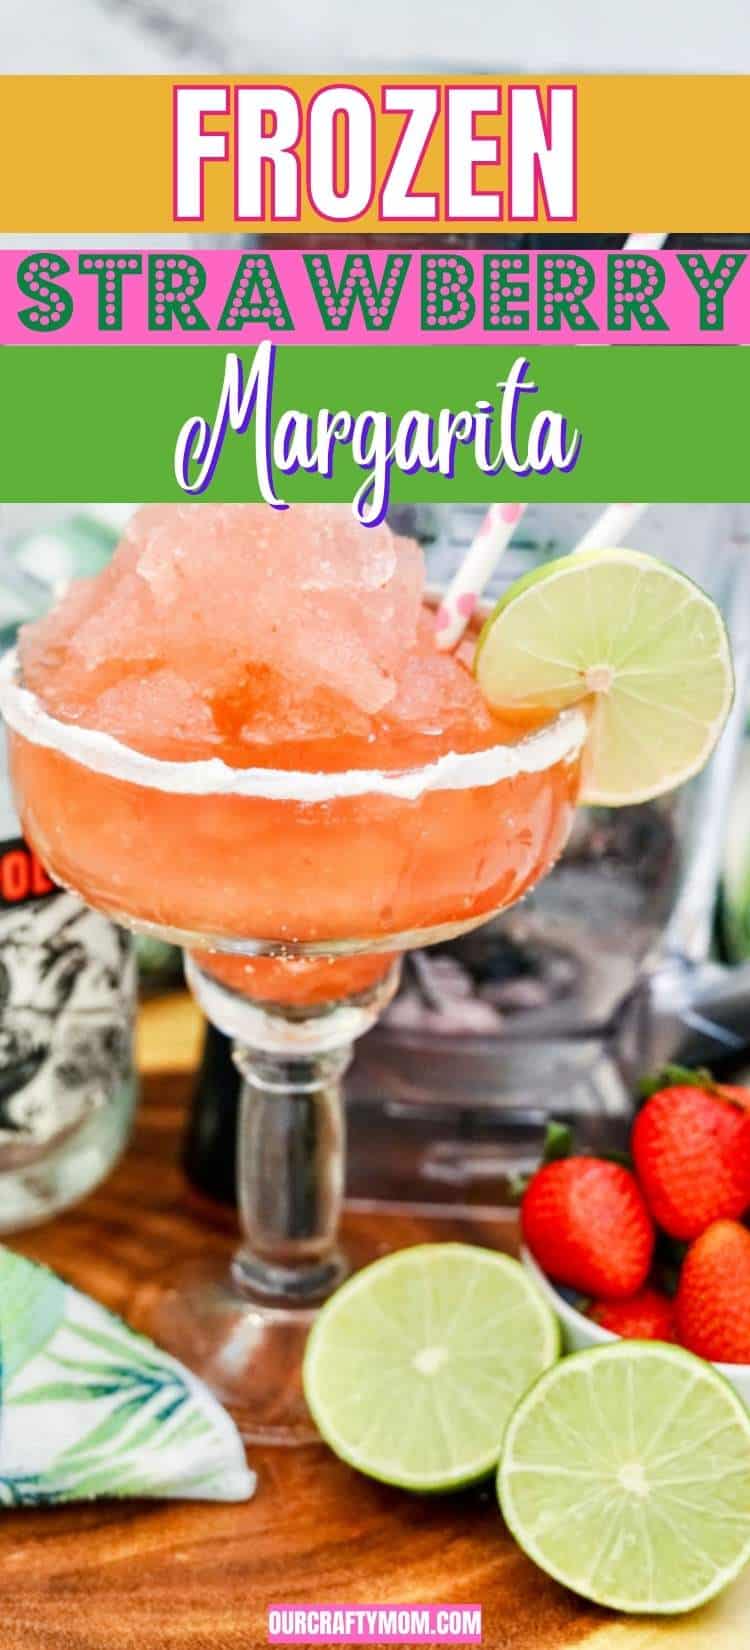 Frozen Strawberry Margarita pin image with text